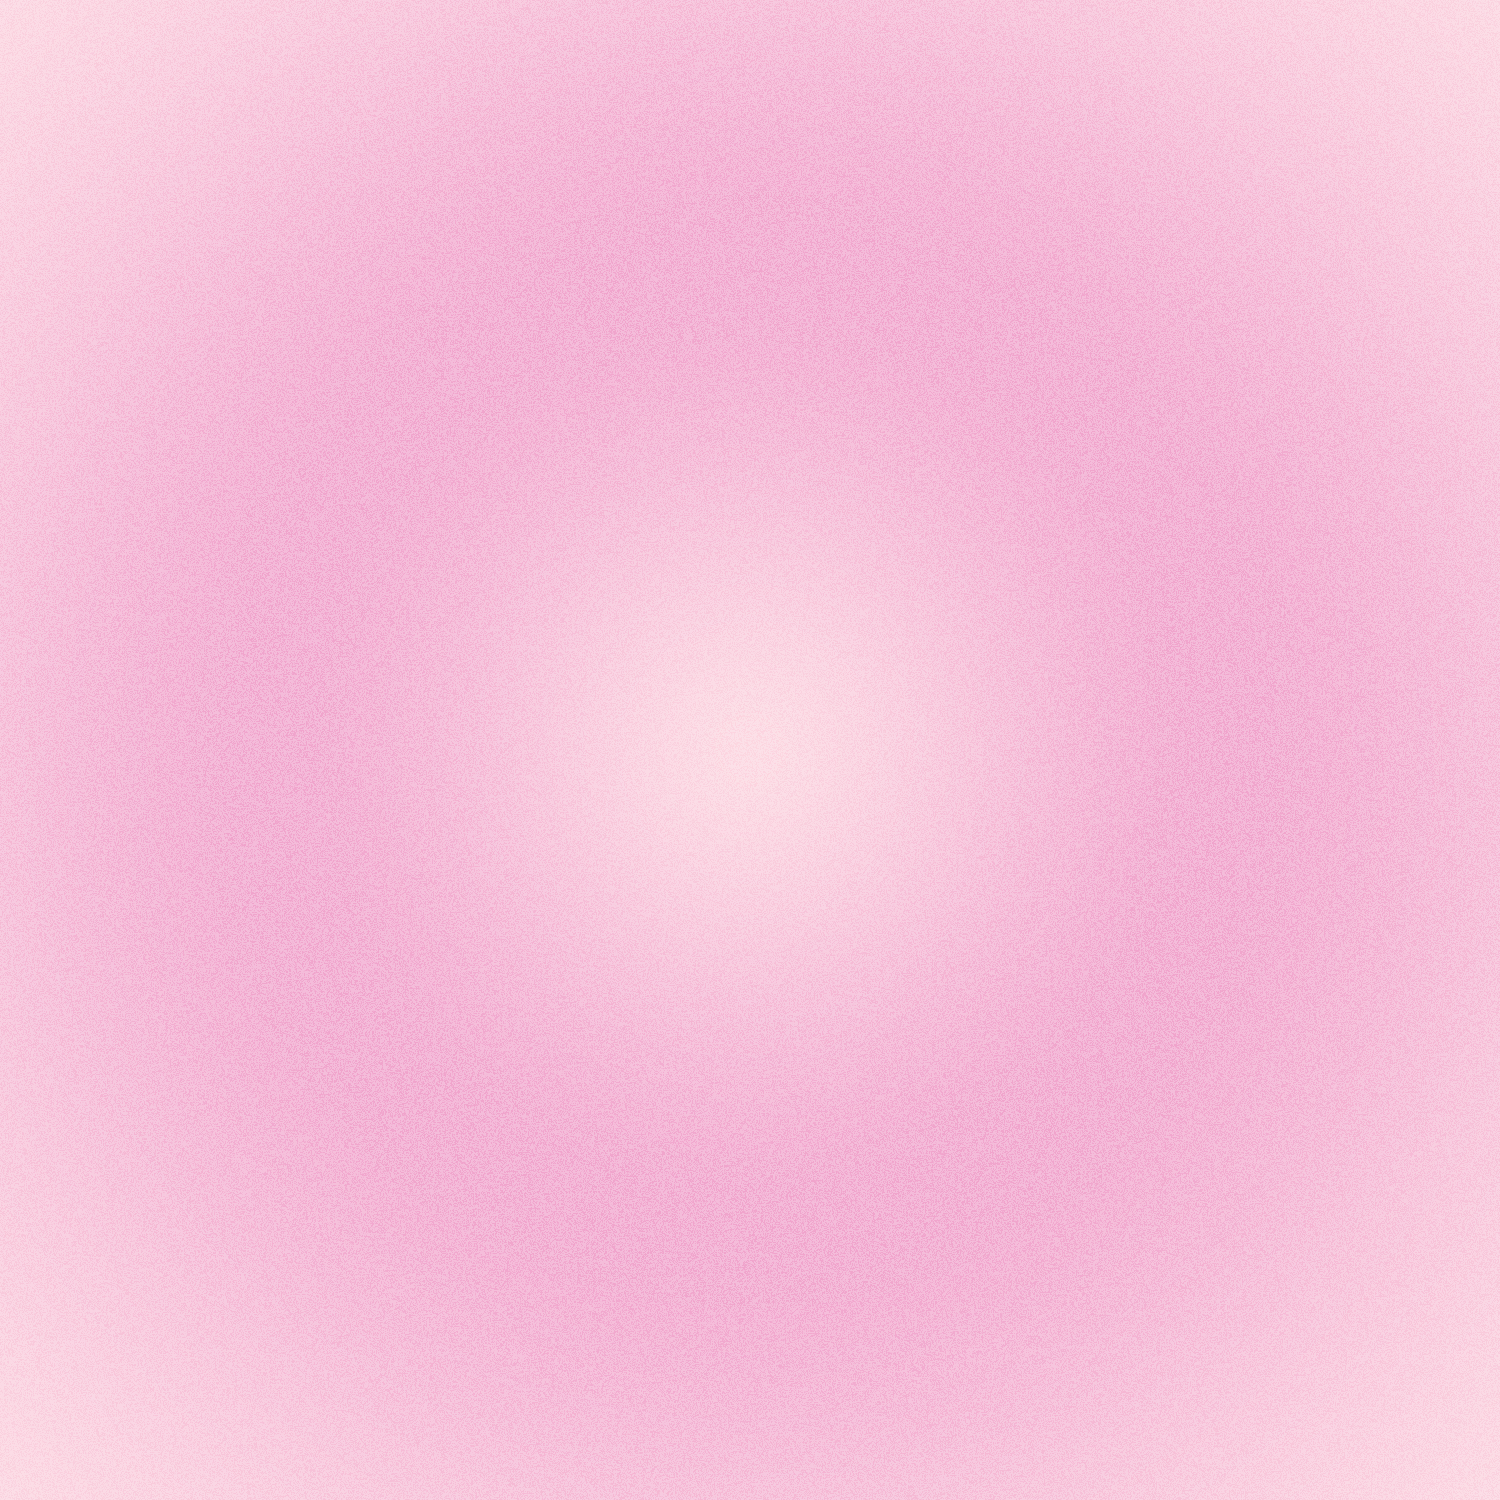 Pink And White Gradient Texture Background